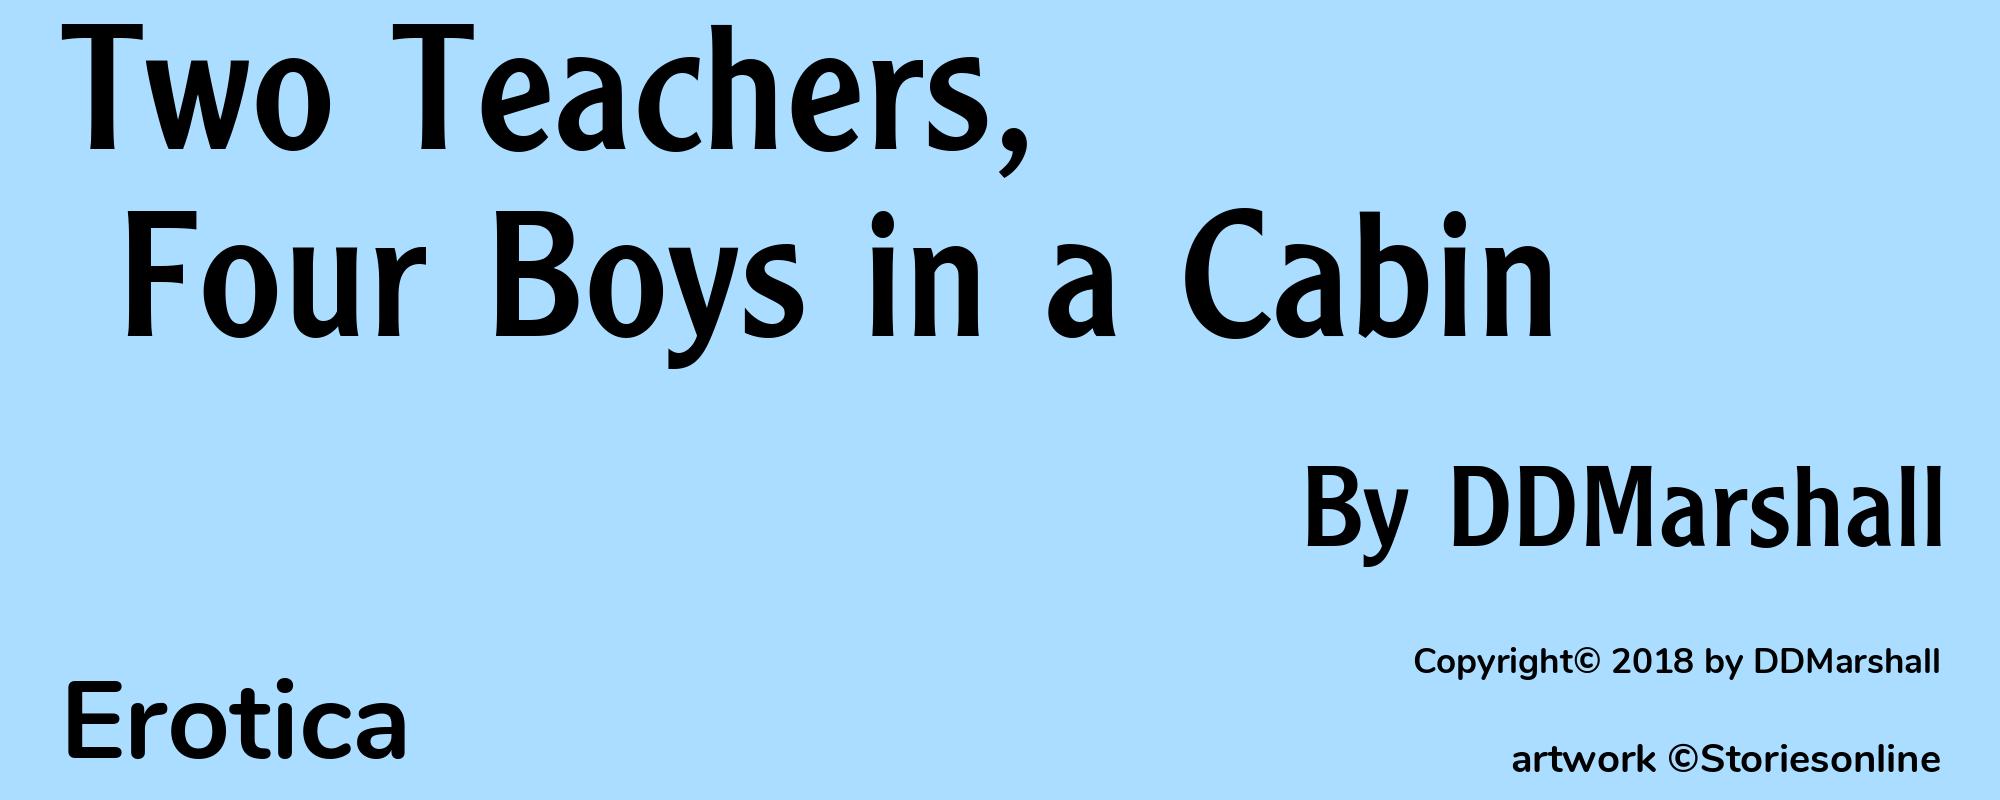 Two Teachers, Four Boys in a Cabin - Cover